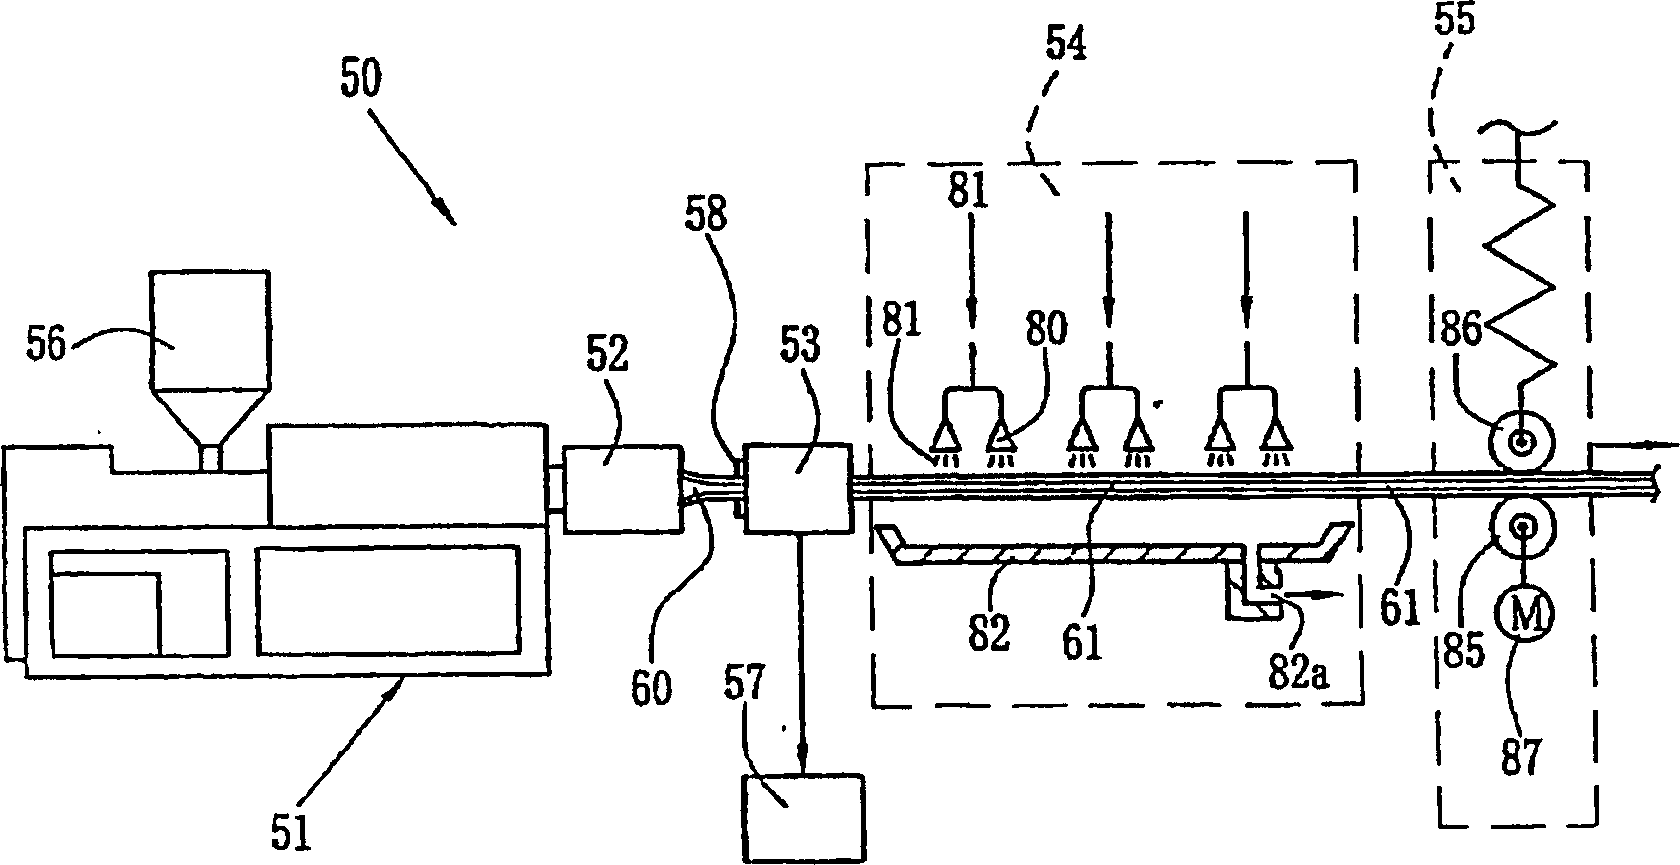 Preform for producing plastic optical components, method of fabricating the preform, and plastic optical fiber